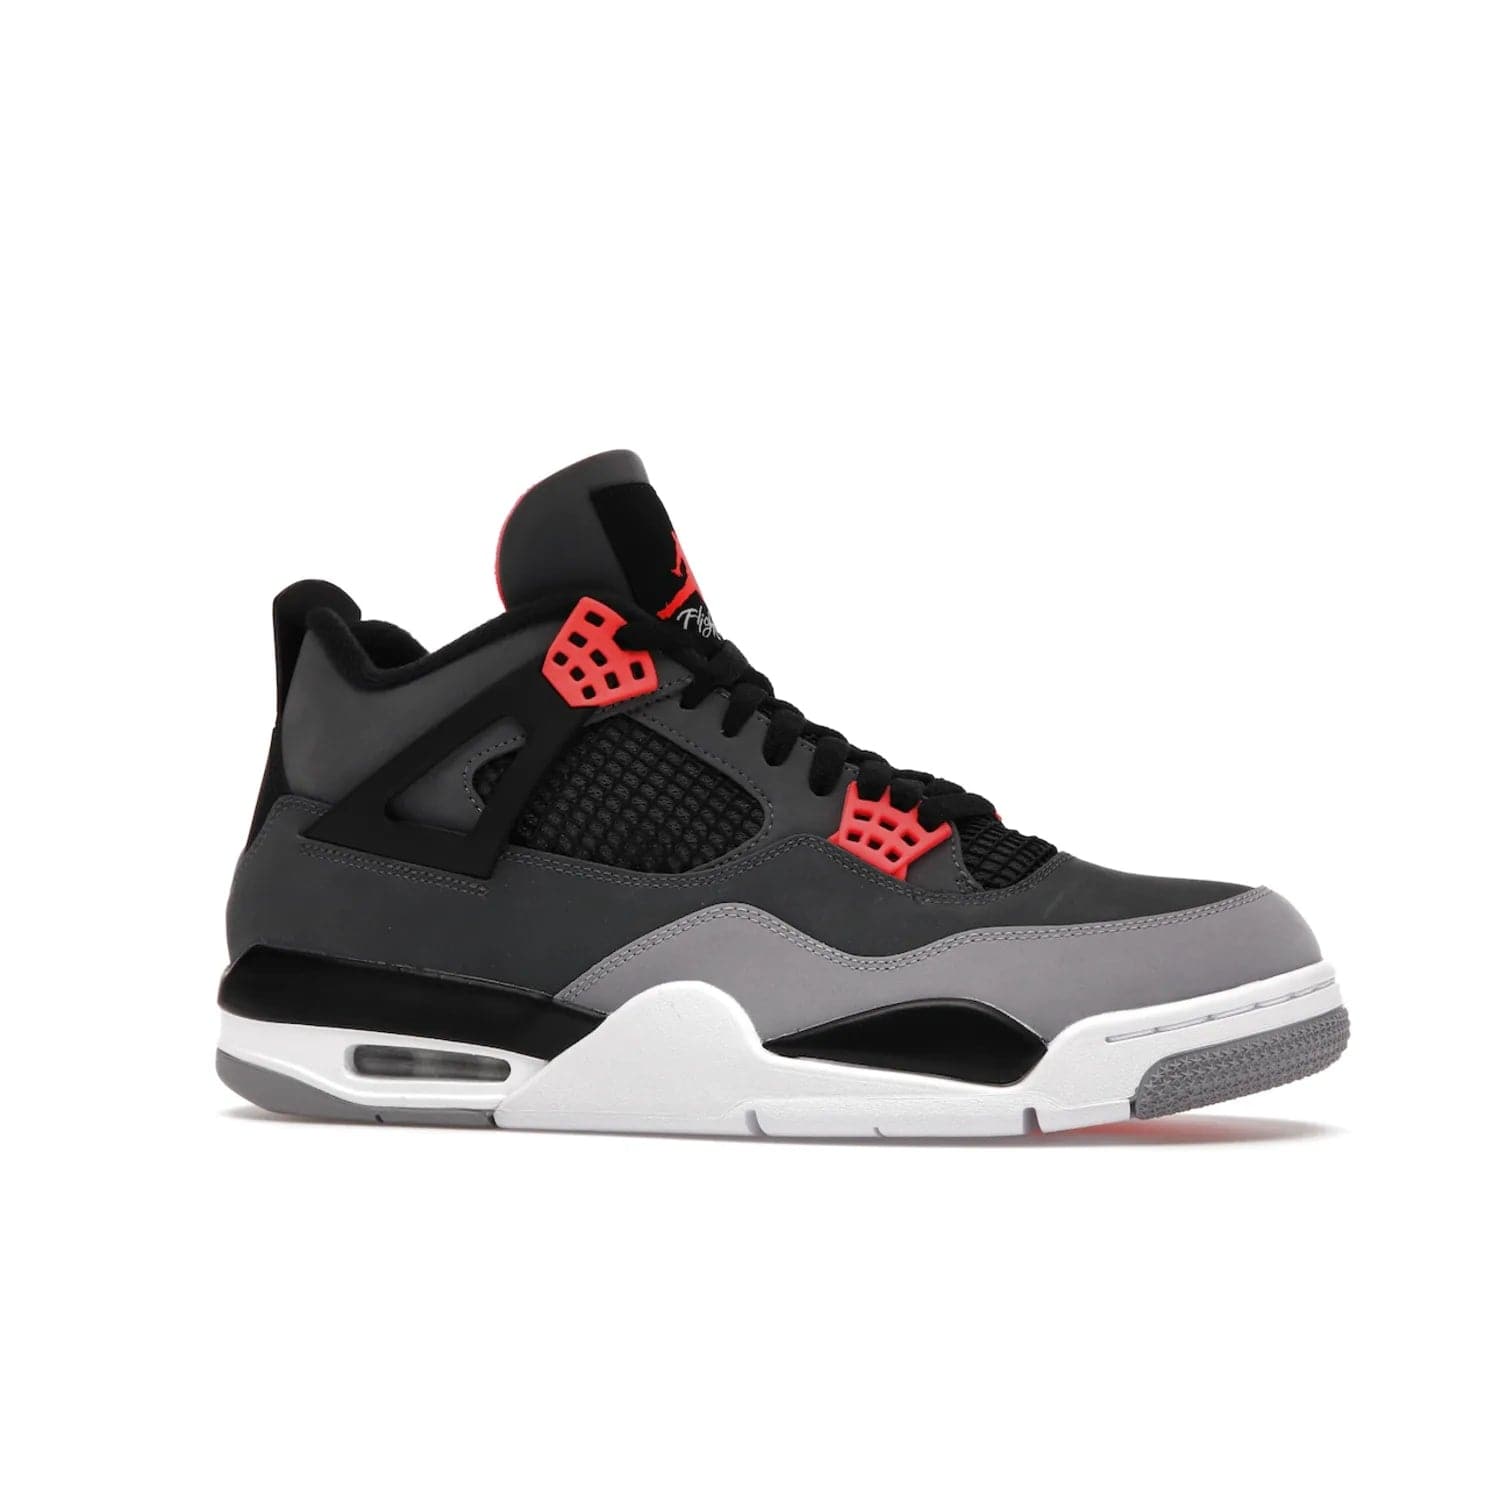 Jordan 4 Retro Infrared - Image 3 - Only at www.BallersClubKickz.com - Introducing the classic & timeless Air Jordan 4 Infrared. Durabuck upper, TPU mesh inserts, tech straps & heel tabs in dark grey and infrared accents. White sole with visible Air units. Out June 15, 2022. Get your pair now!